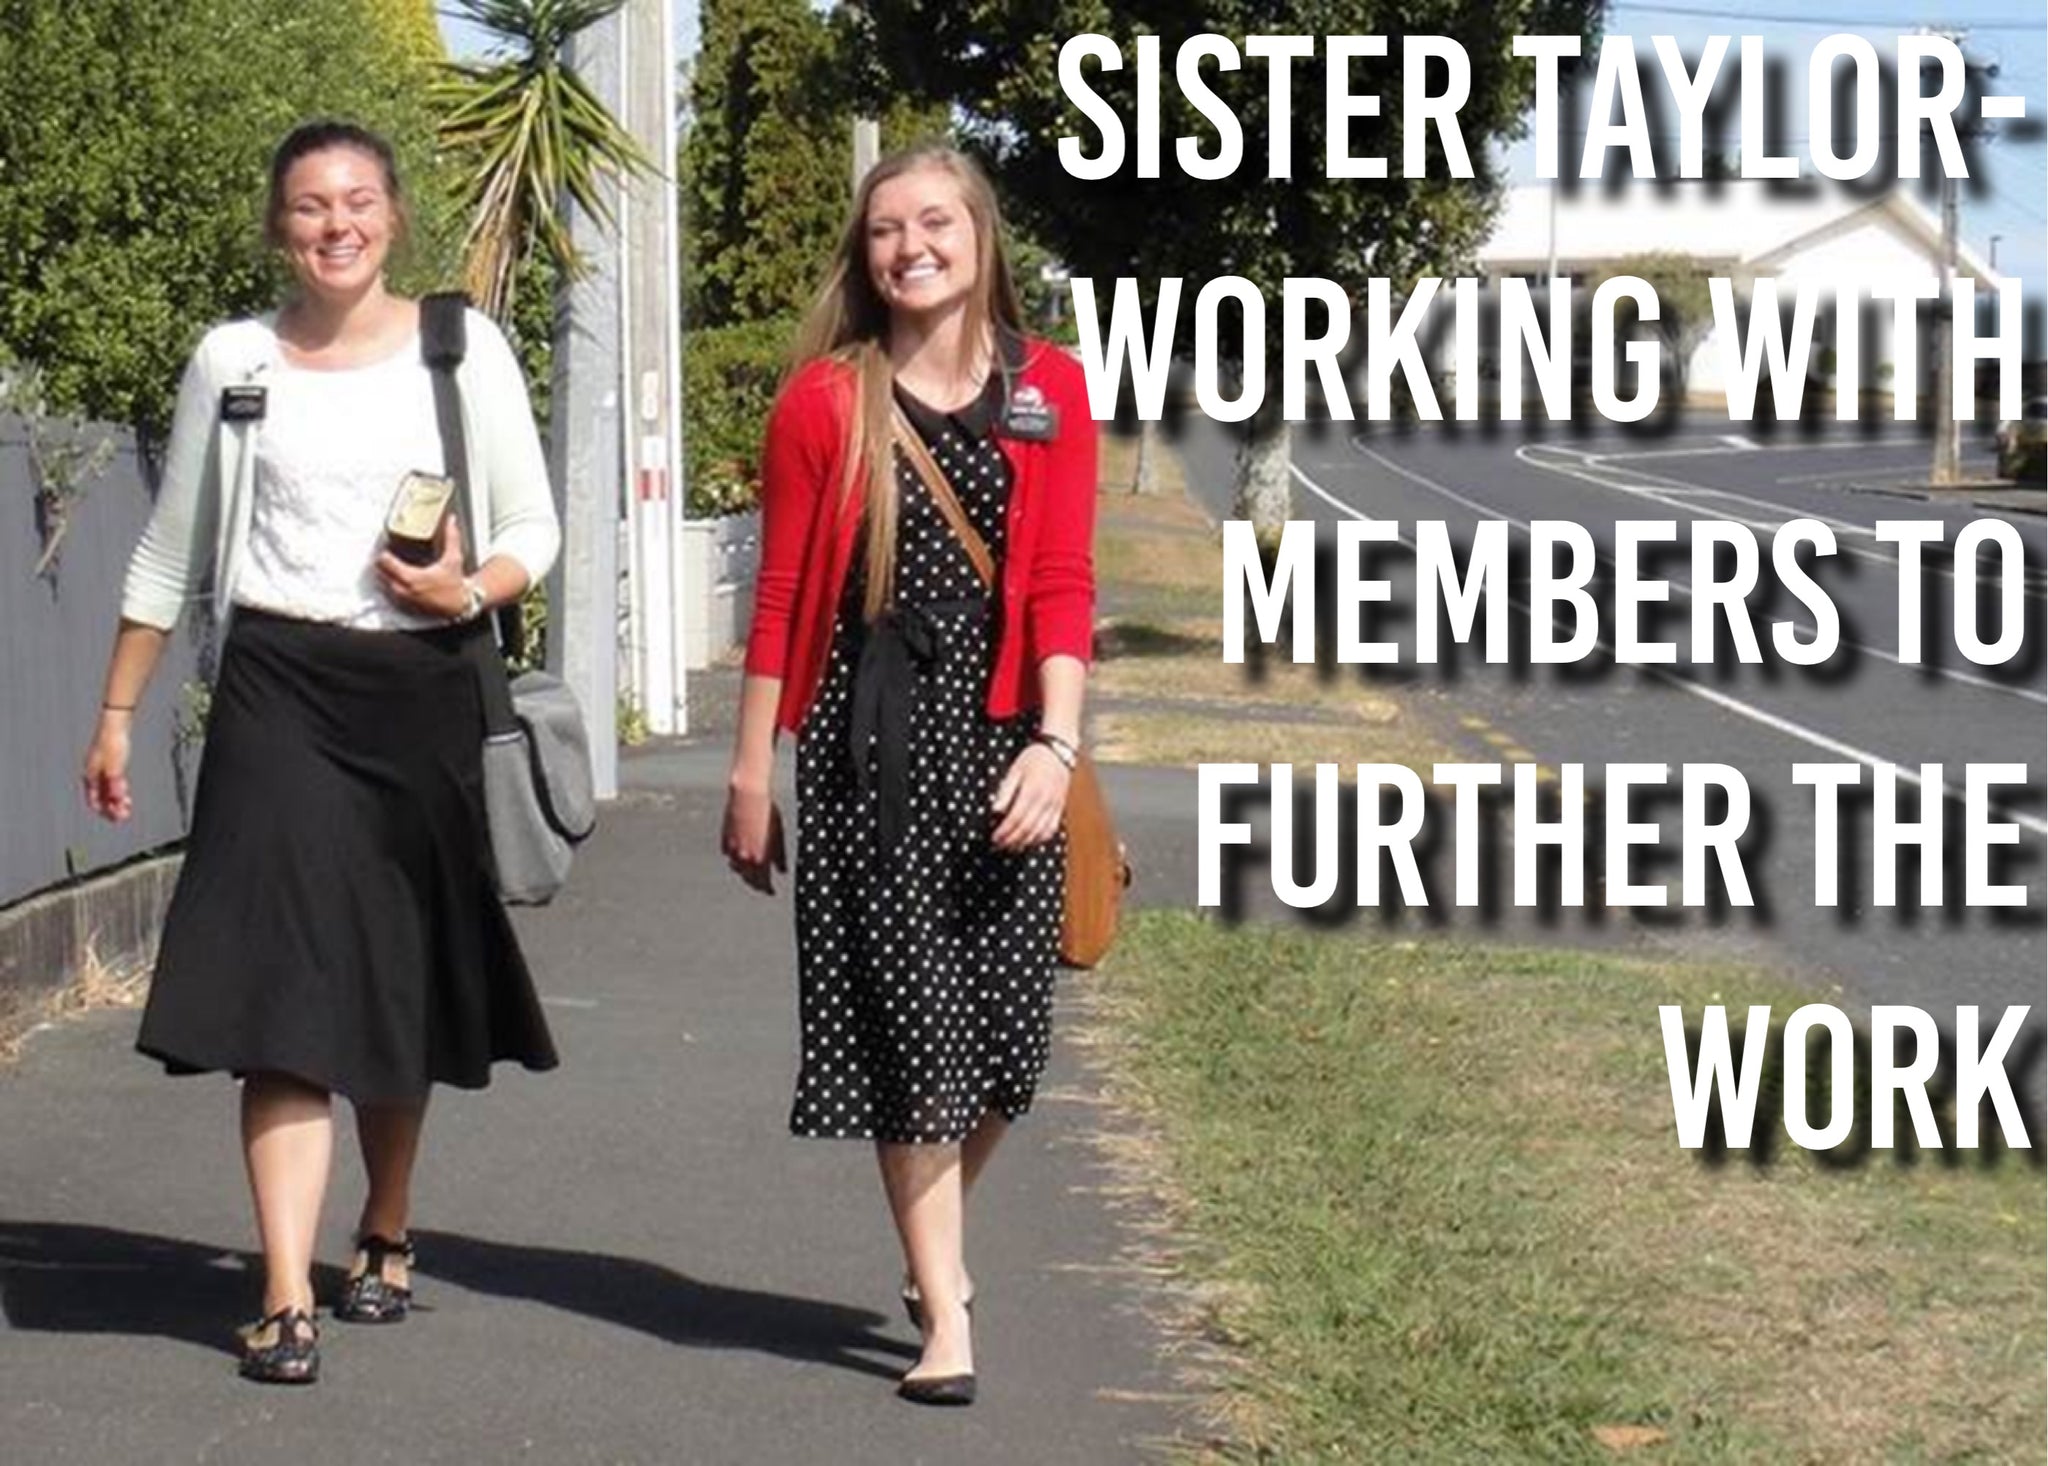 Sister Taylor- Working with Members to Further the Work